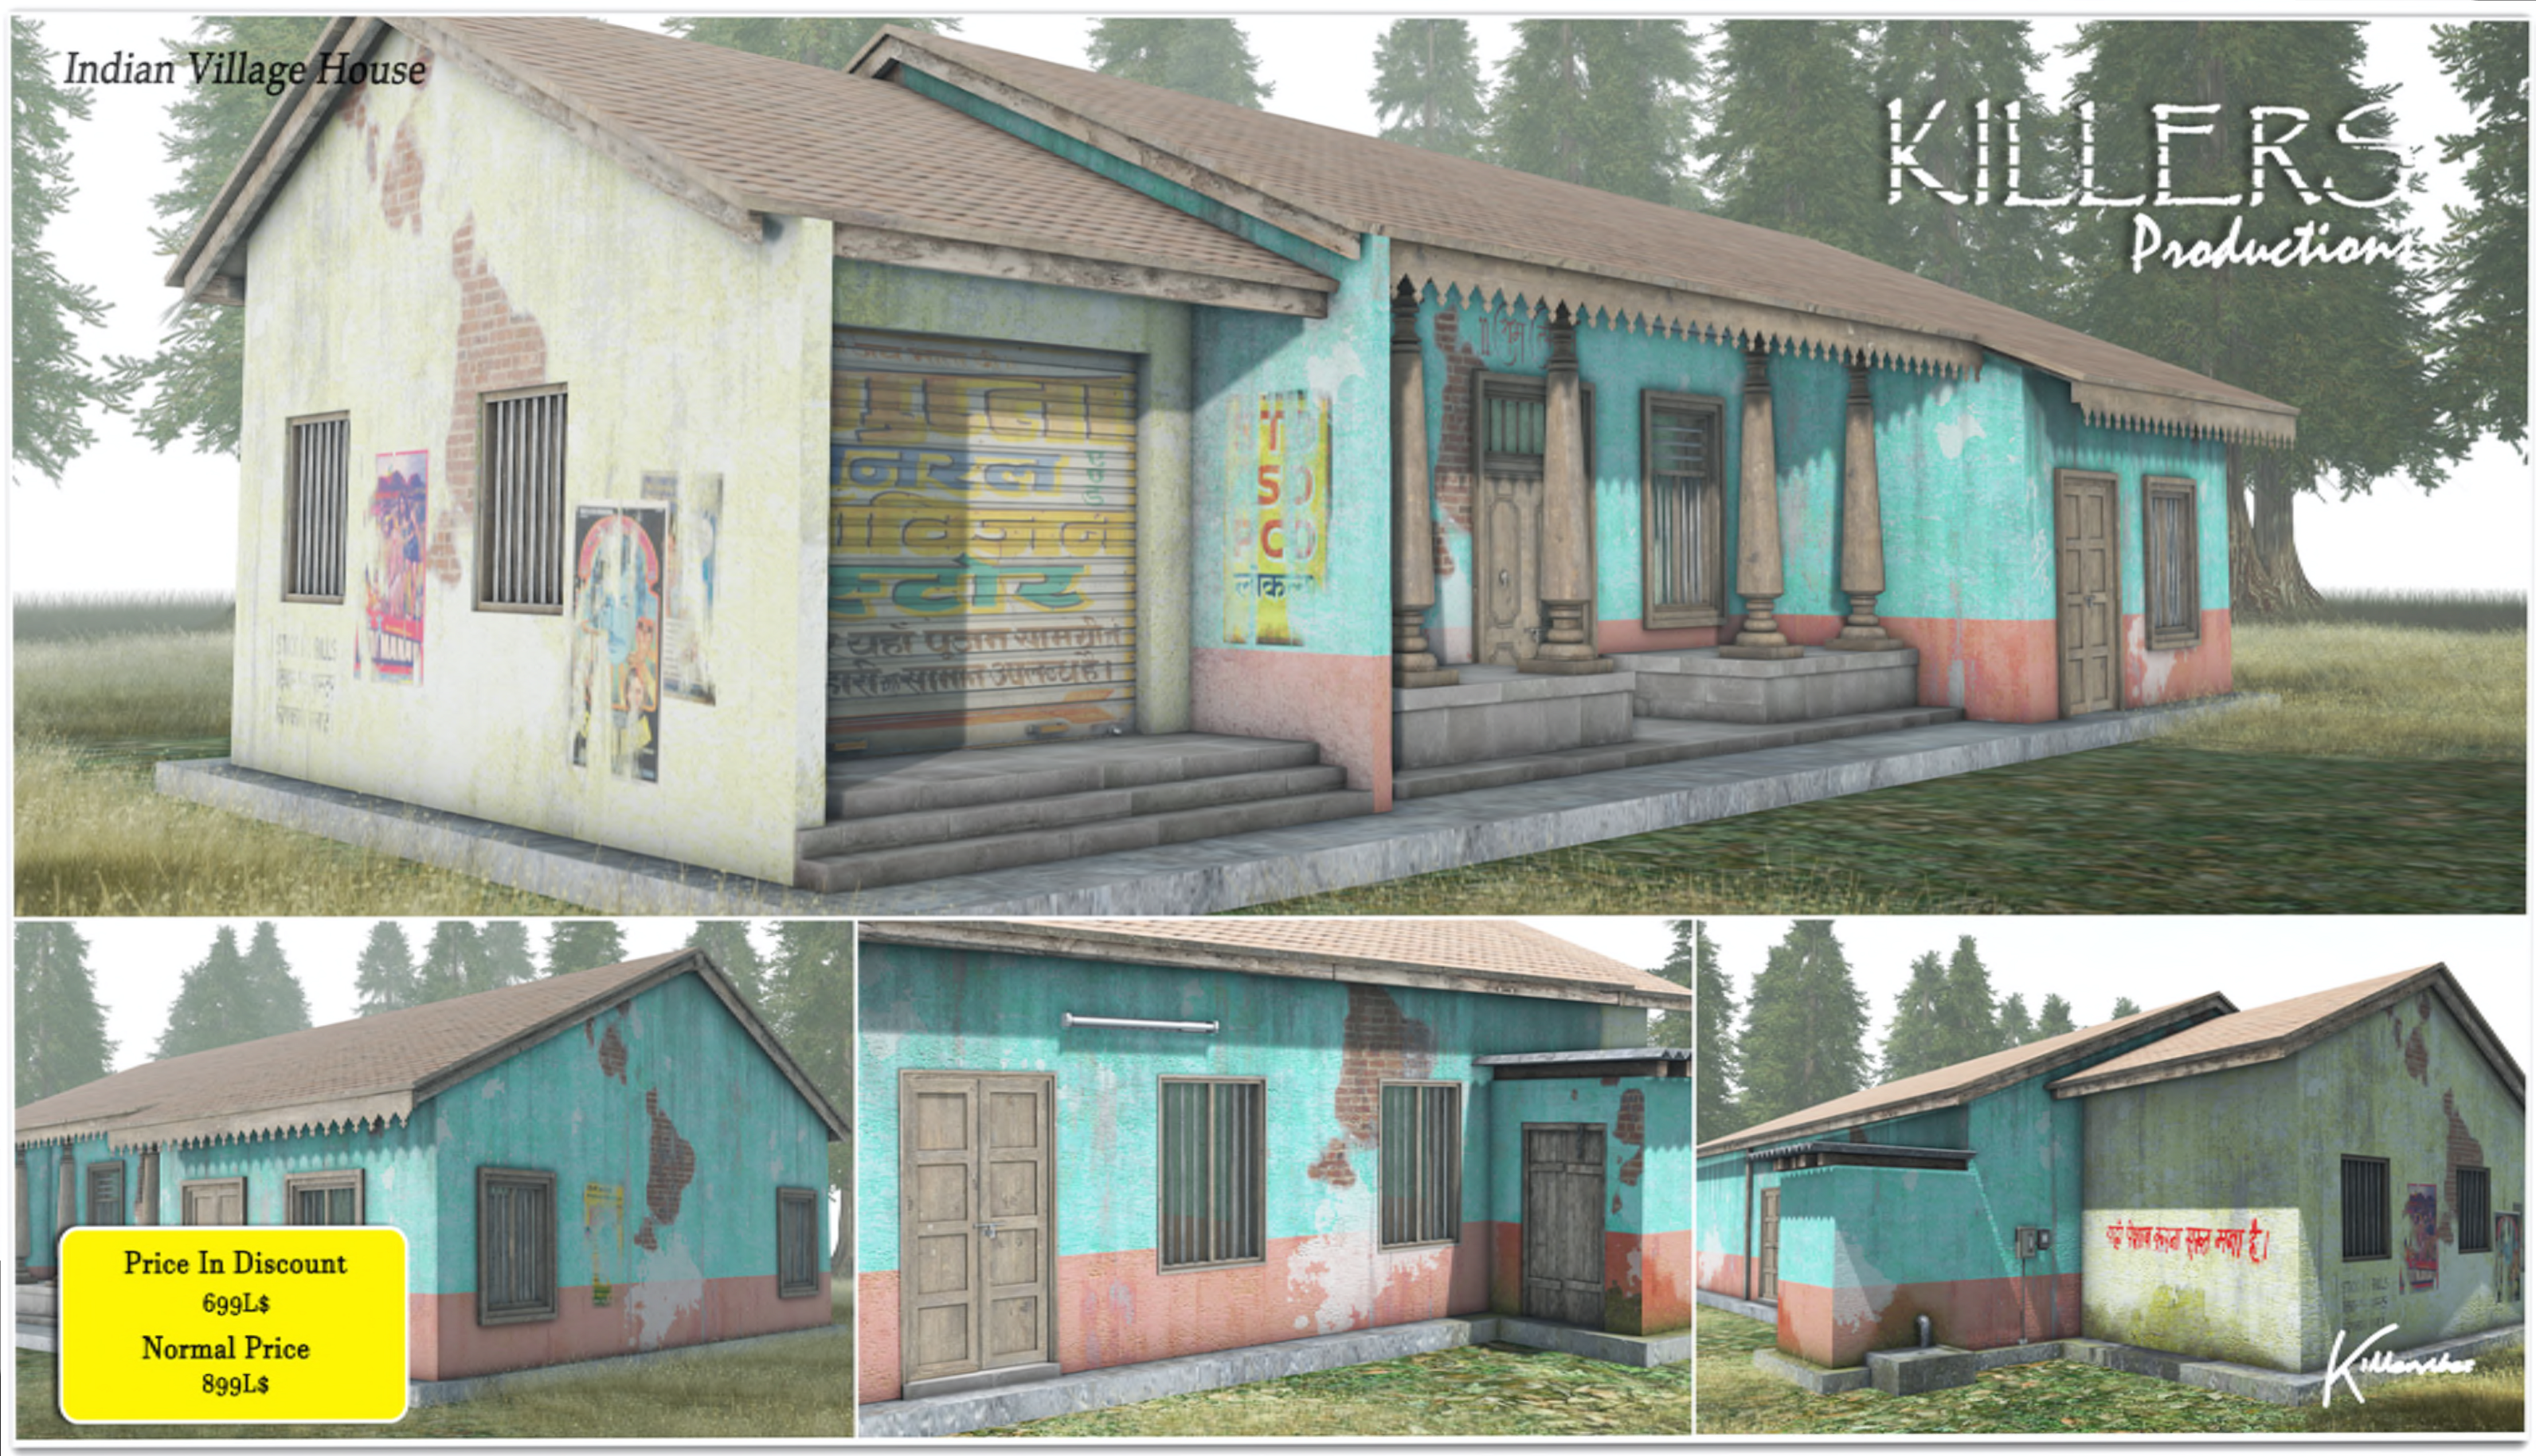 Killers Productions – Indian Village House